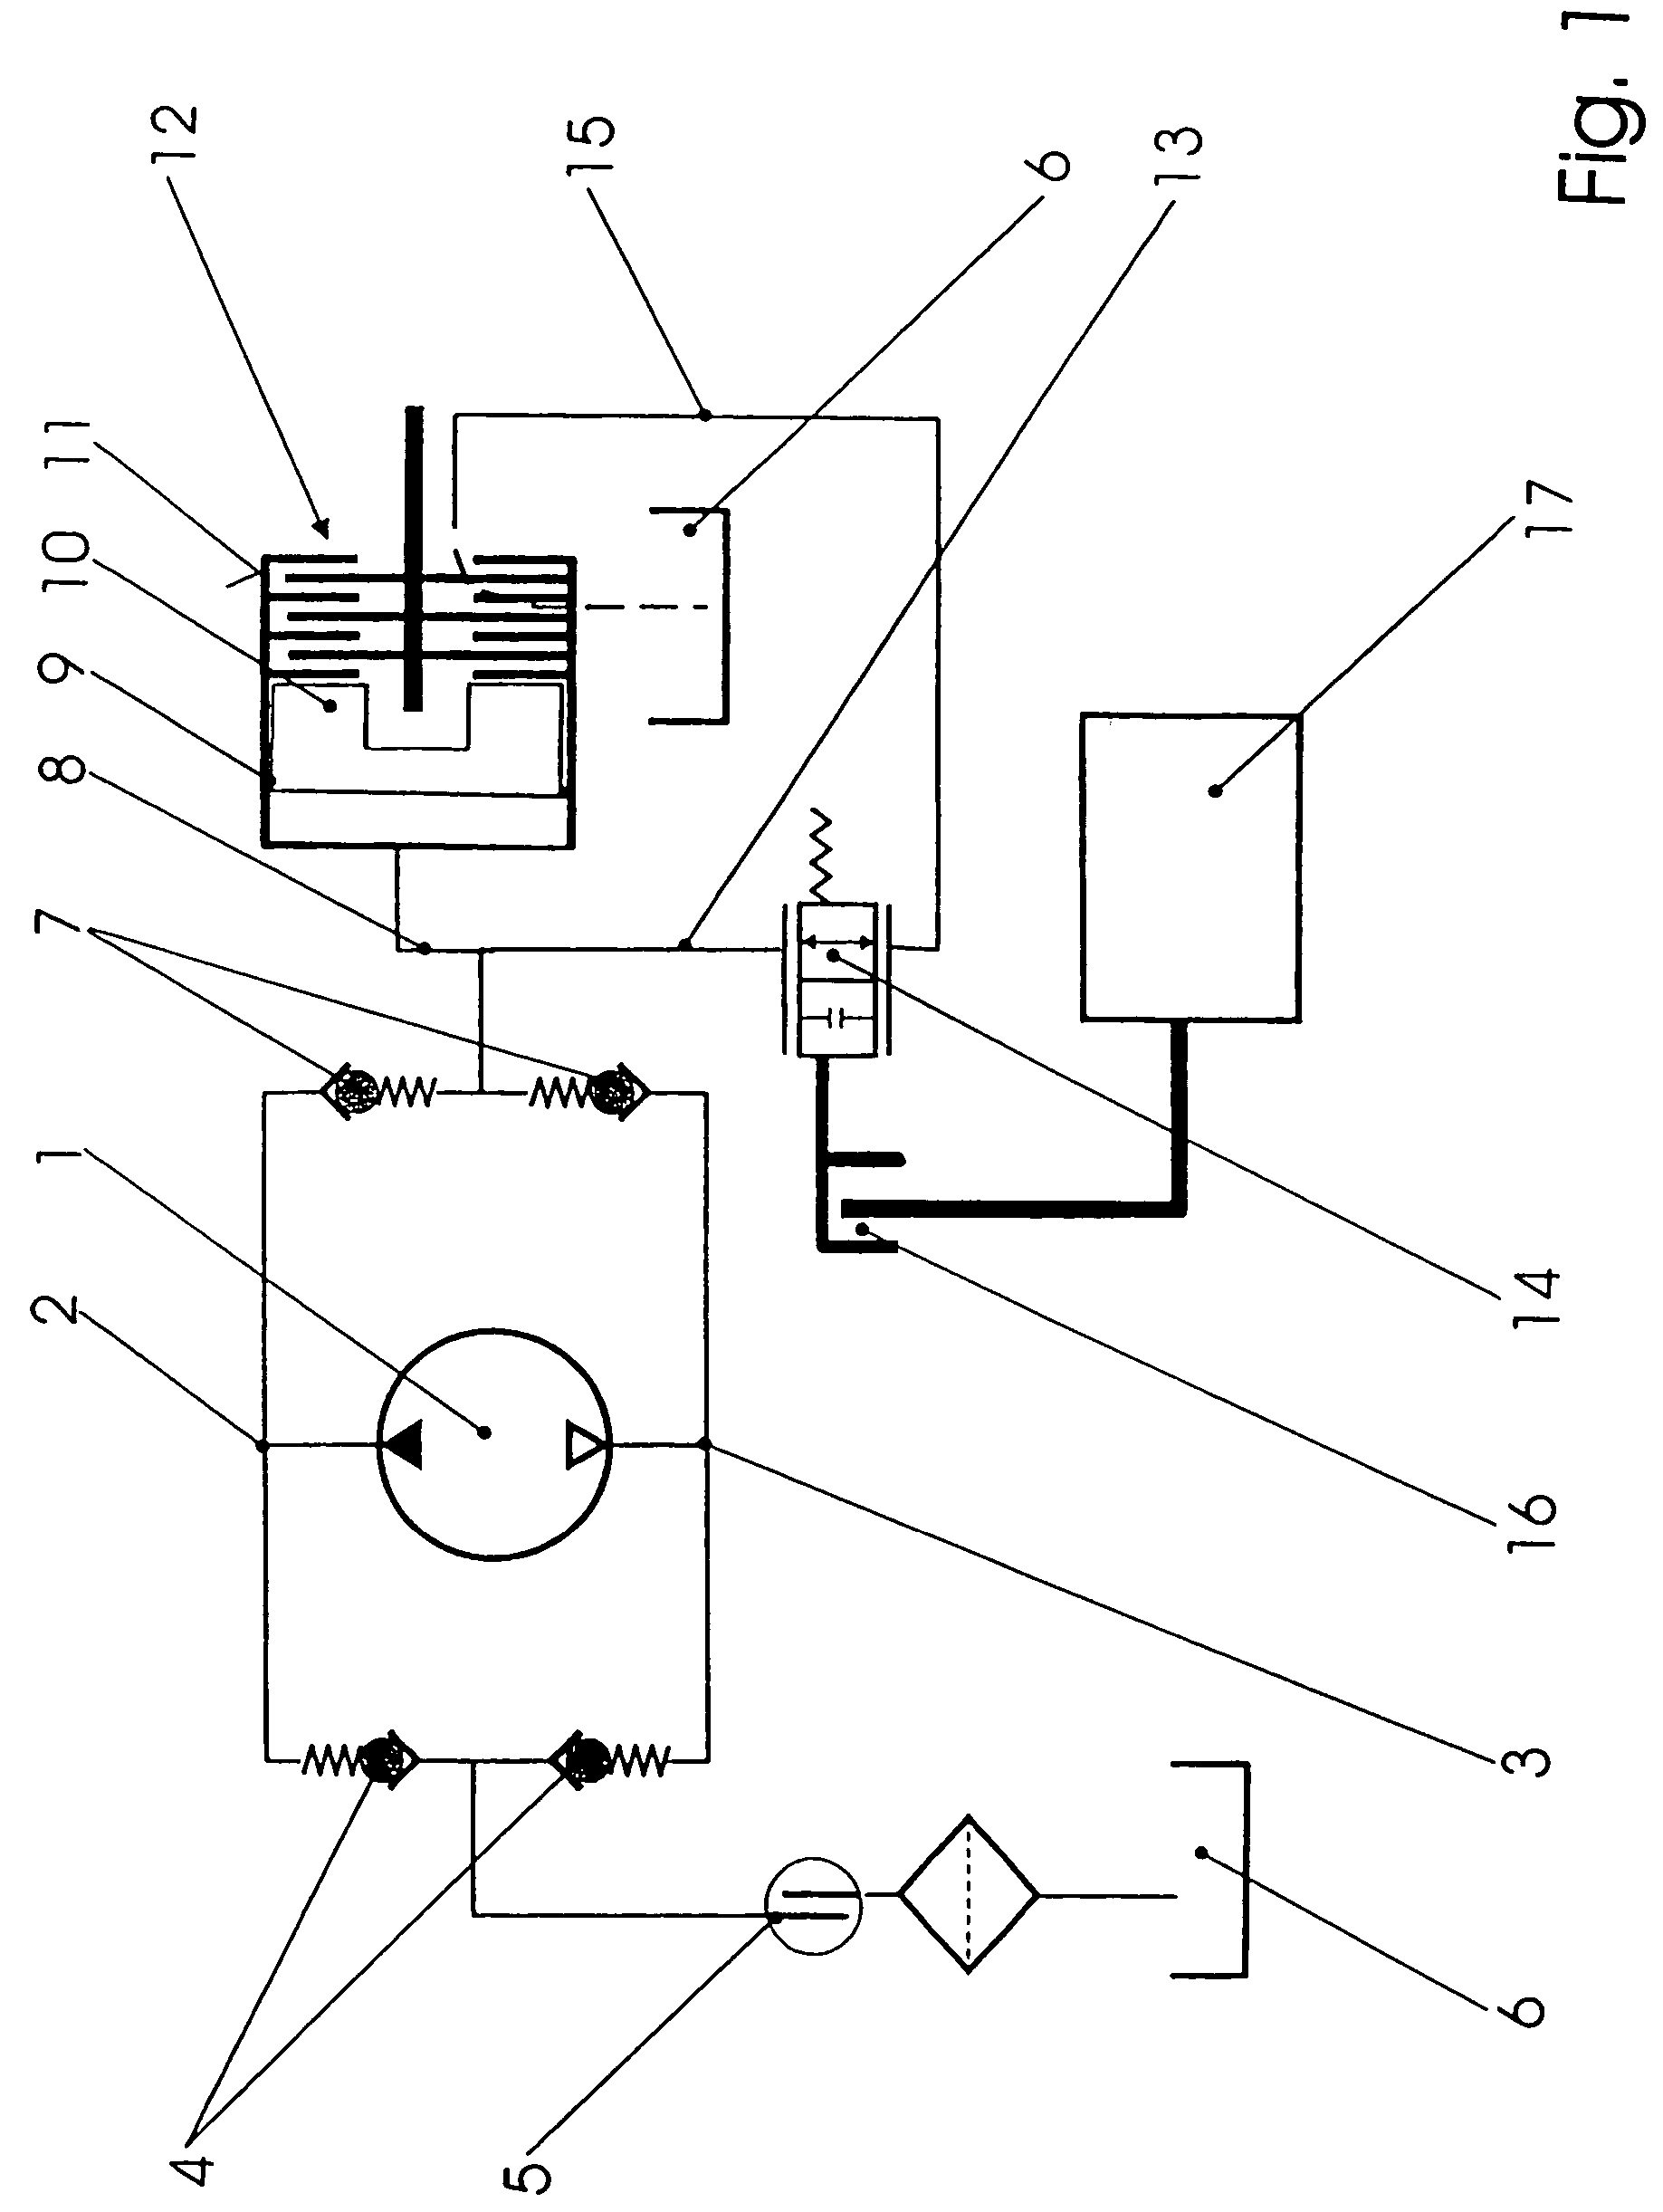 Speed differential-dependent hydraulic clutch with a control valve